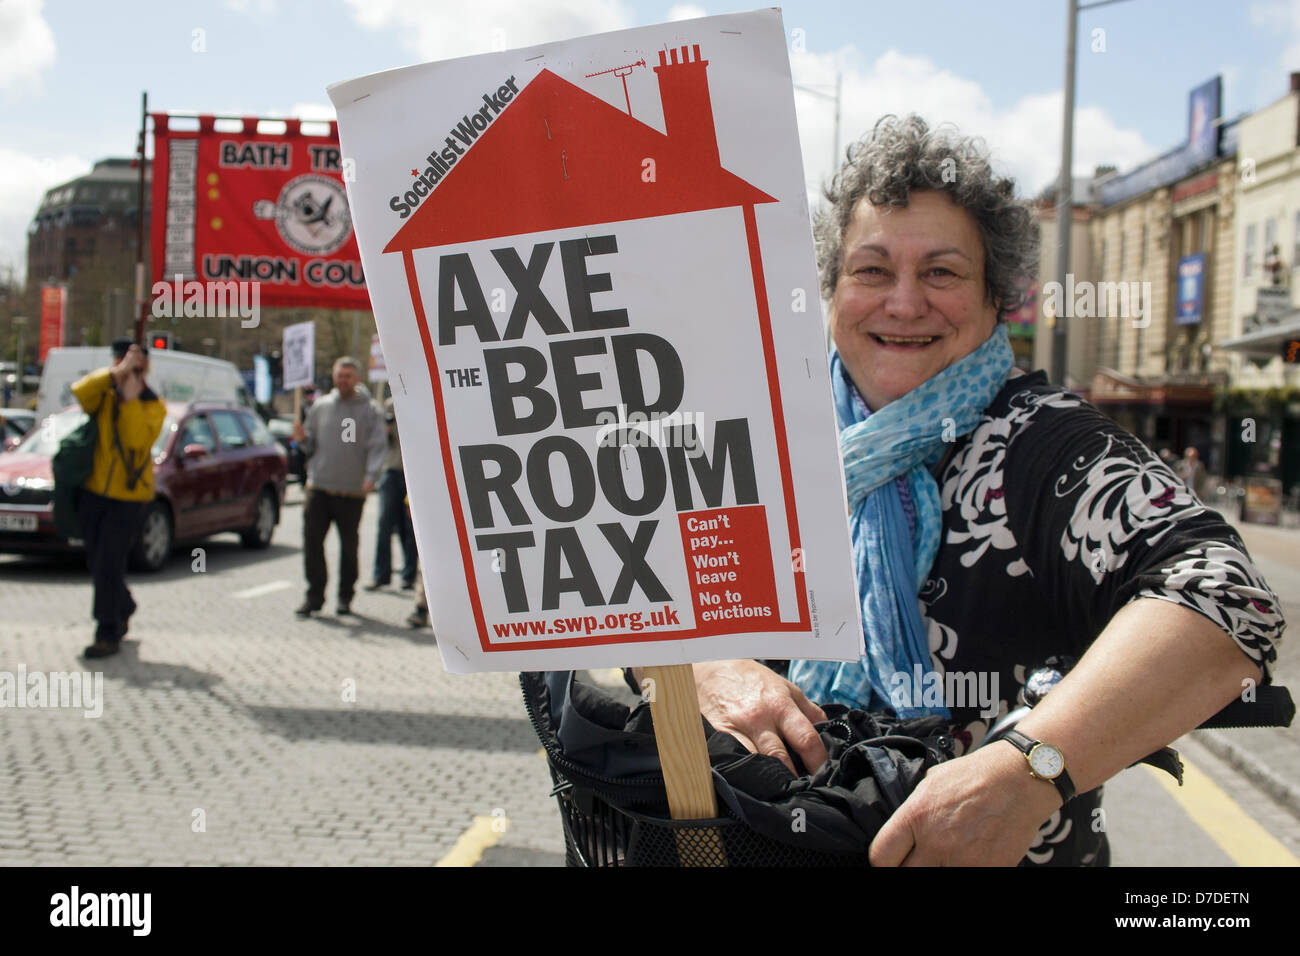 Bristol,UK,May 4th,2013. A woman protester carrying a placard protesting about the bedroom tax takes part in a protest march against government cuts. Credit:  lynchpics / Alamy Live News Stock Photo